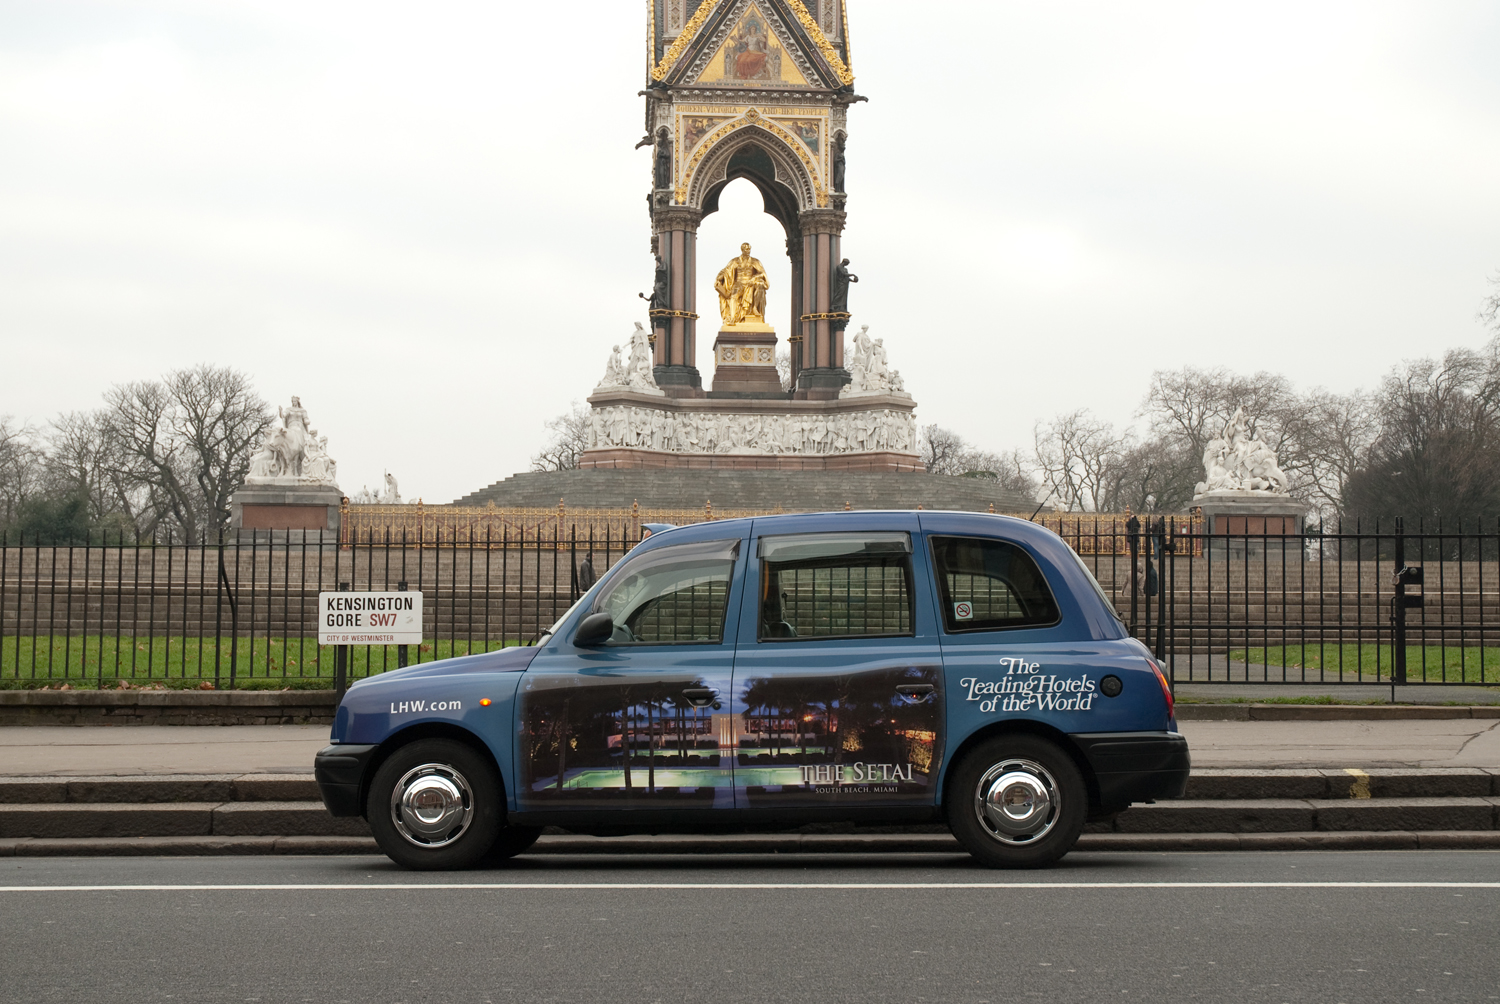 2010 Ubiquitous taxi advertising campaign for Leading Hotels of the World - The Leading Hotels of The World